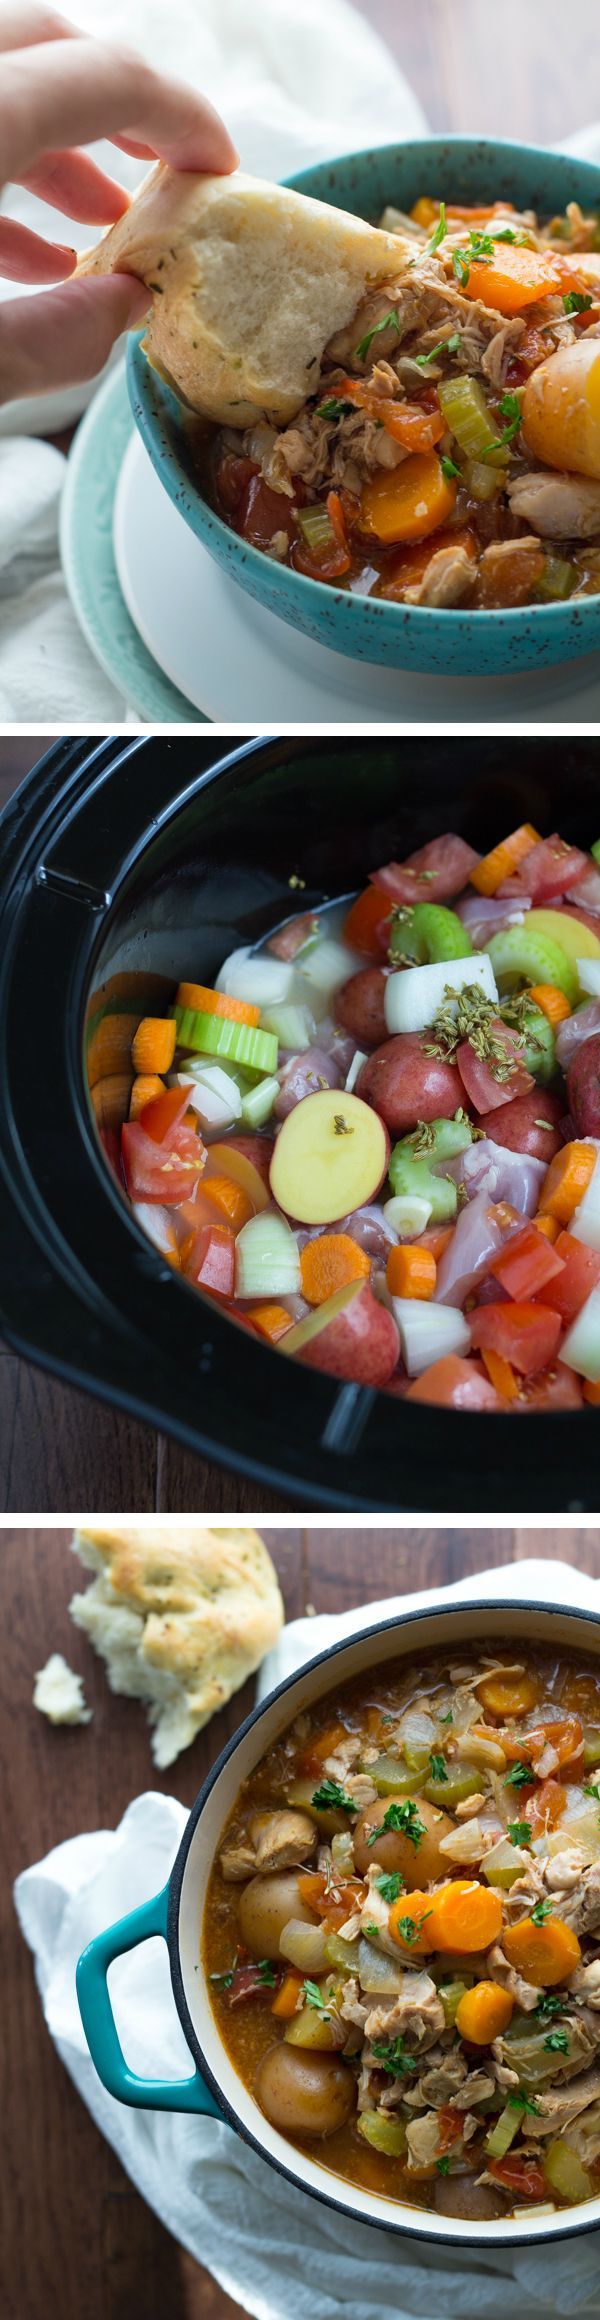 Slow Cooker Tuscan Chicken Stew.. Tested this for my Shrinking On a Budget Meal Plan last week – just now getting around to